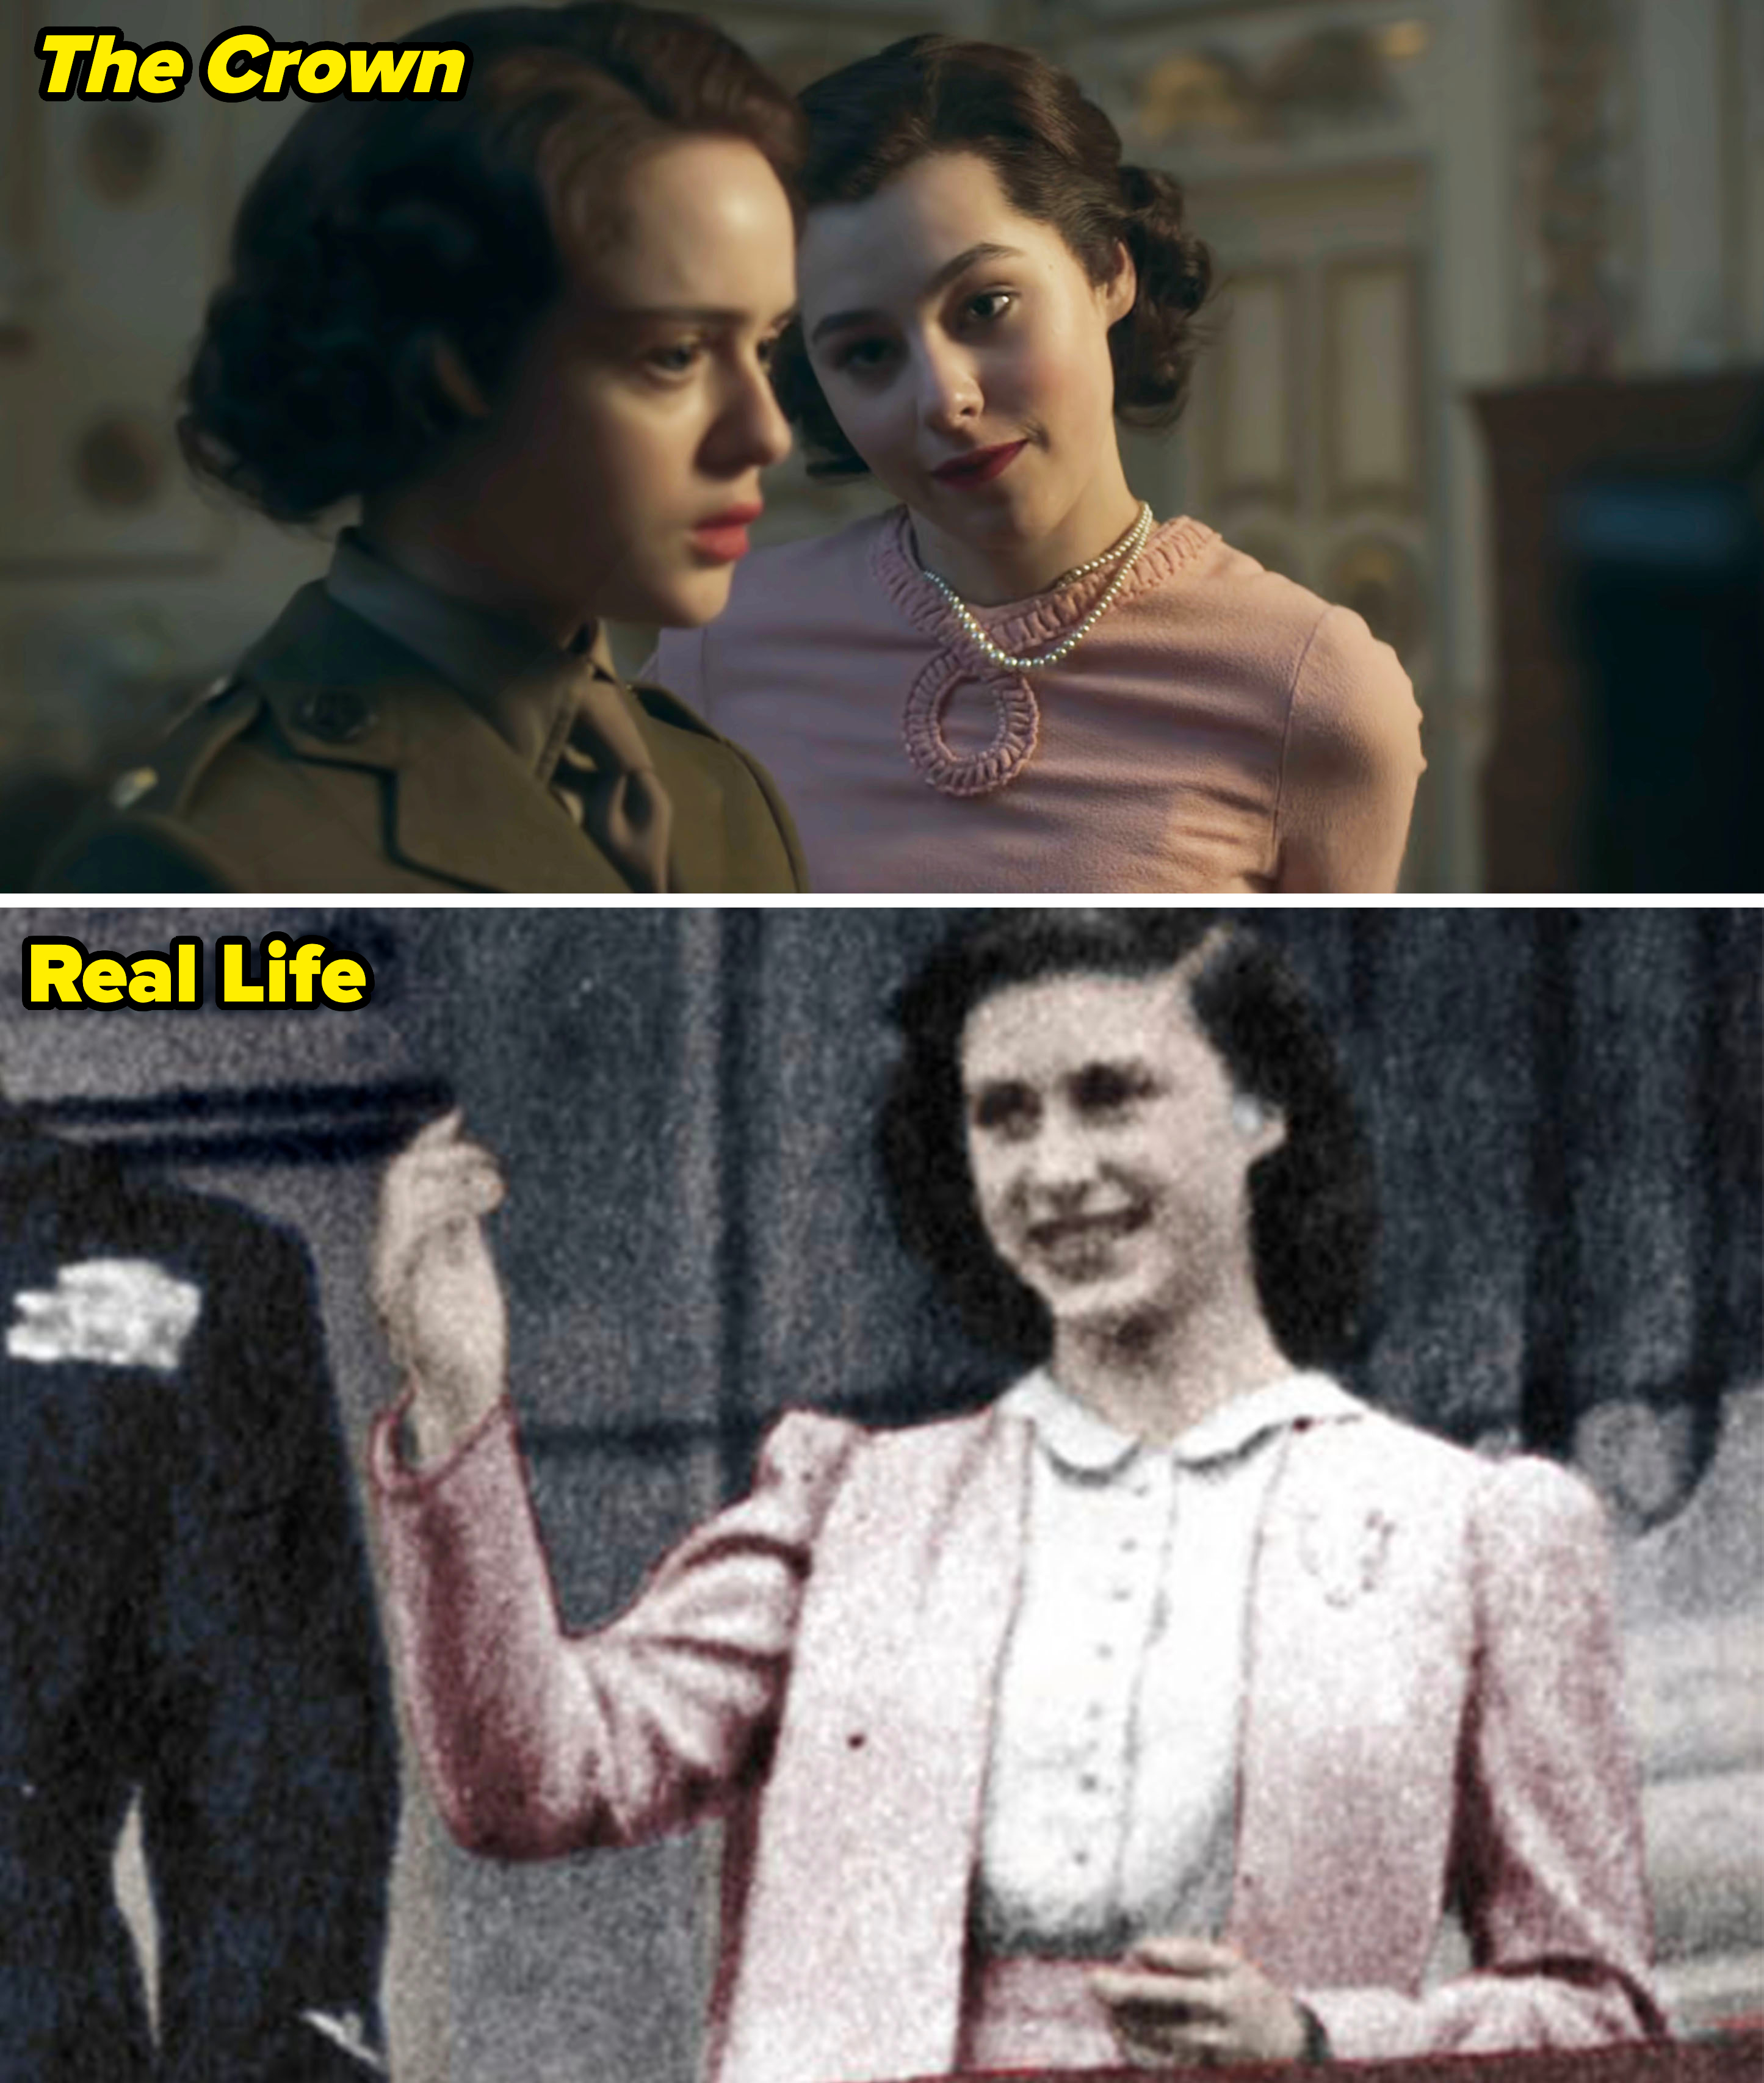 Princess Margaret in real life vs. &quot;The Crown&quot;